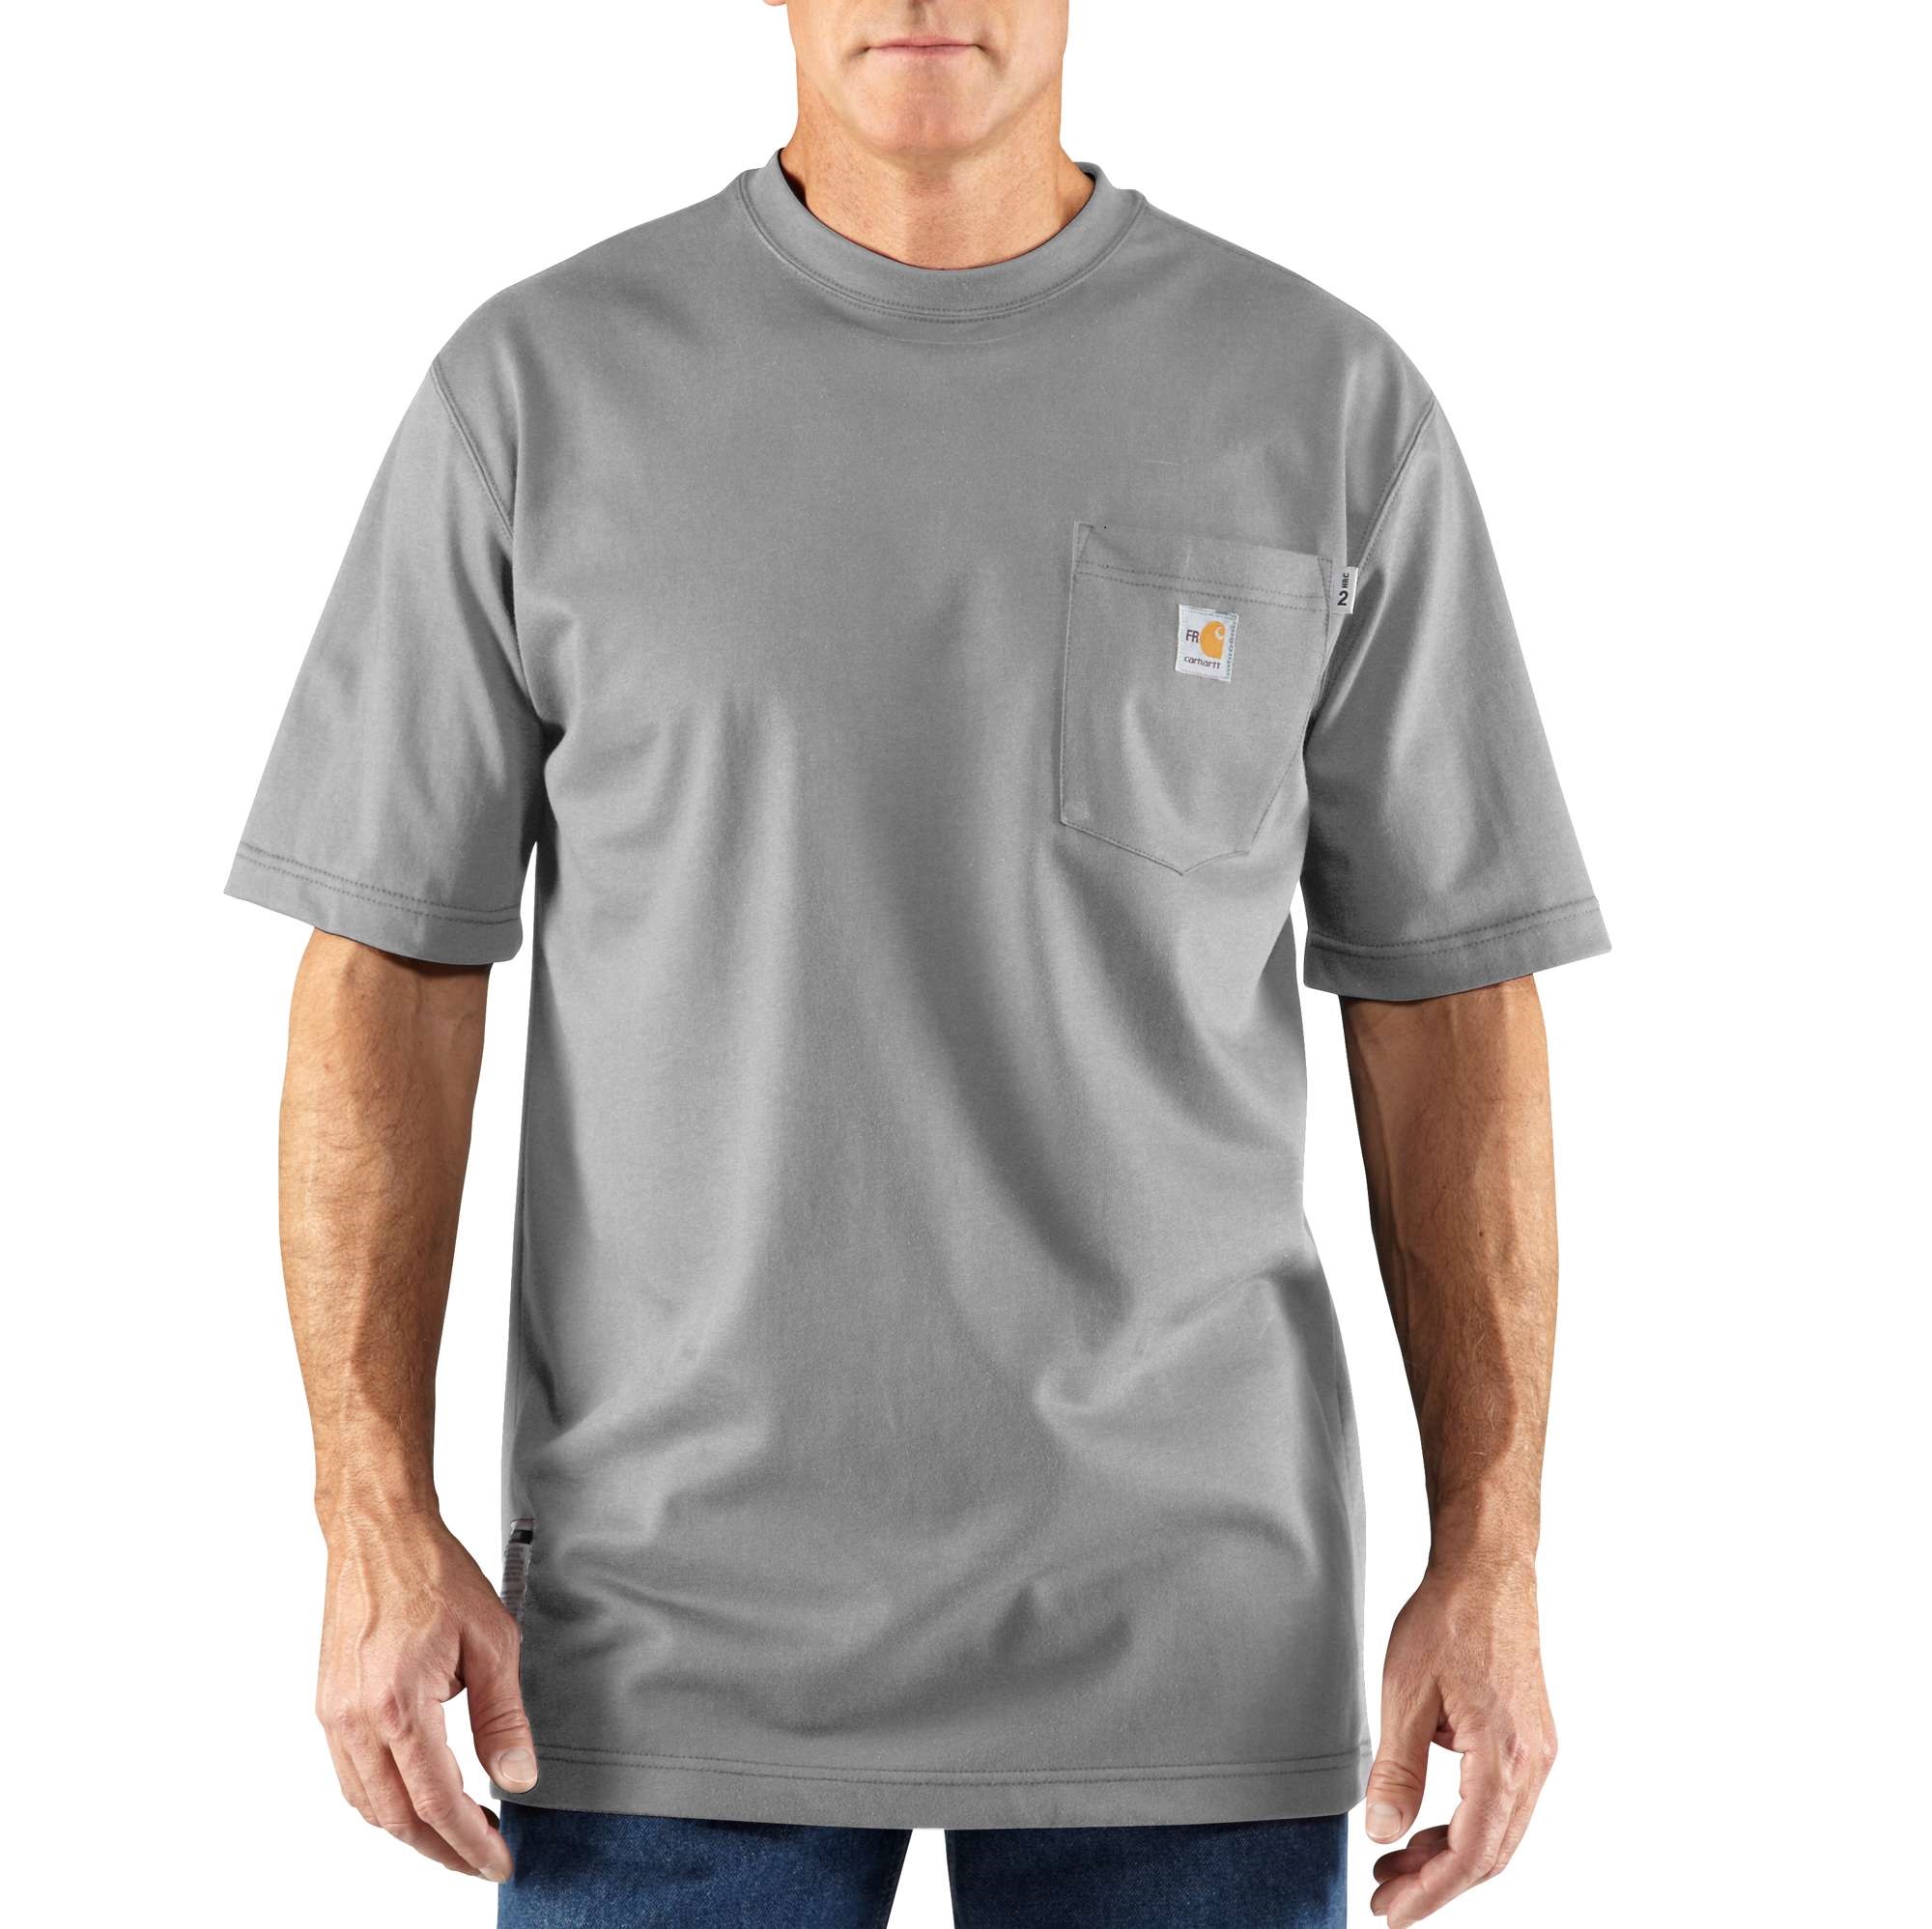 Carhartt Flame Resistant Cotton Short-Sleeve T-Shirt in light gray